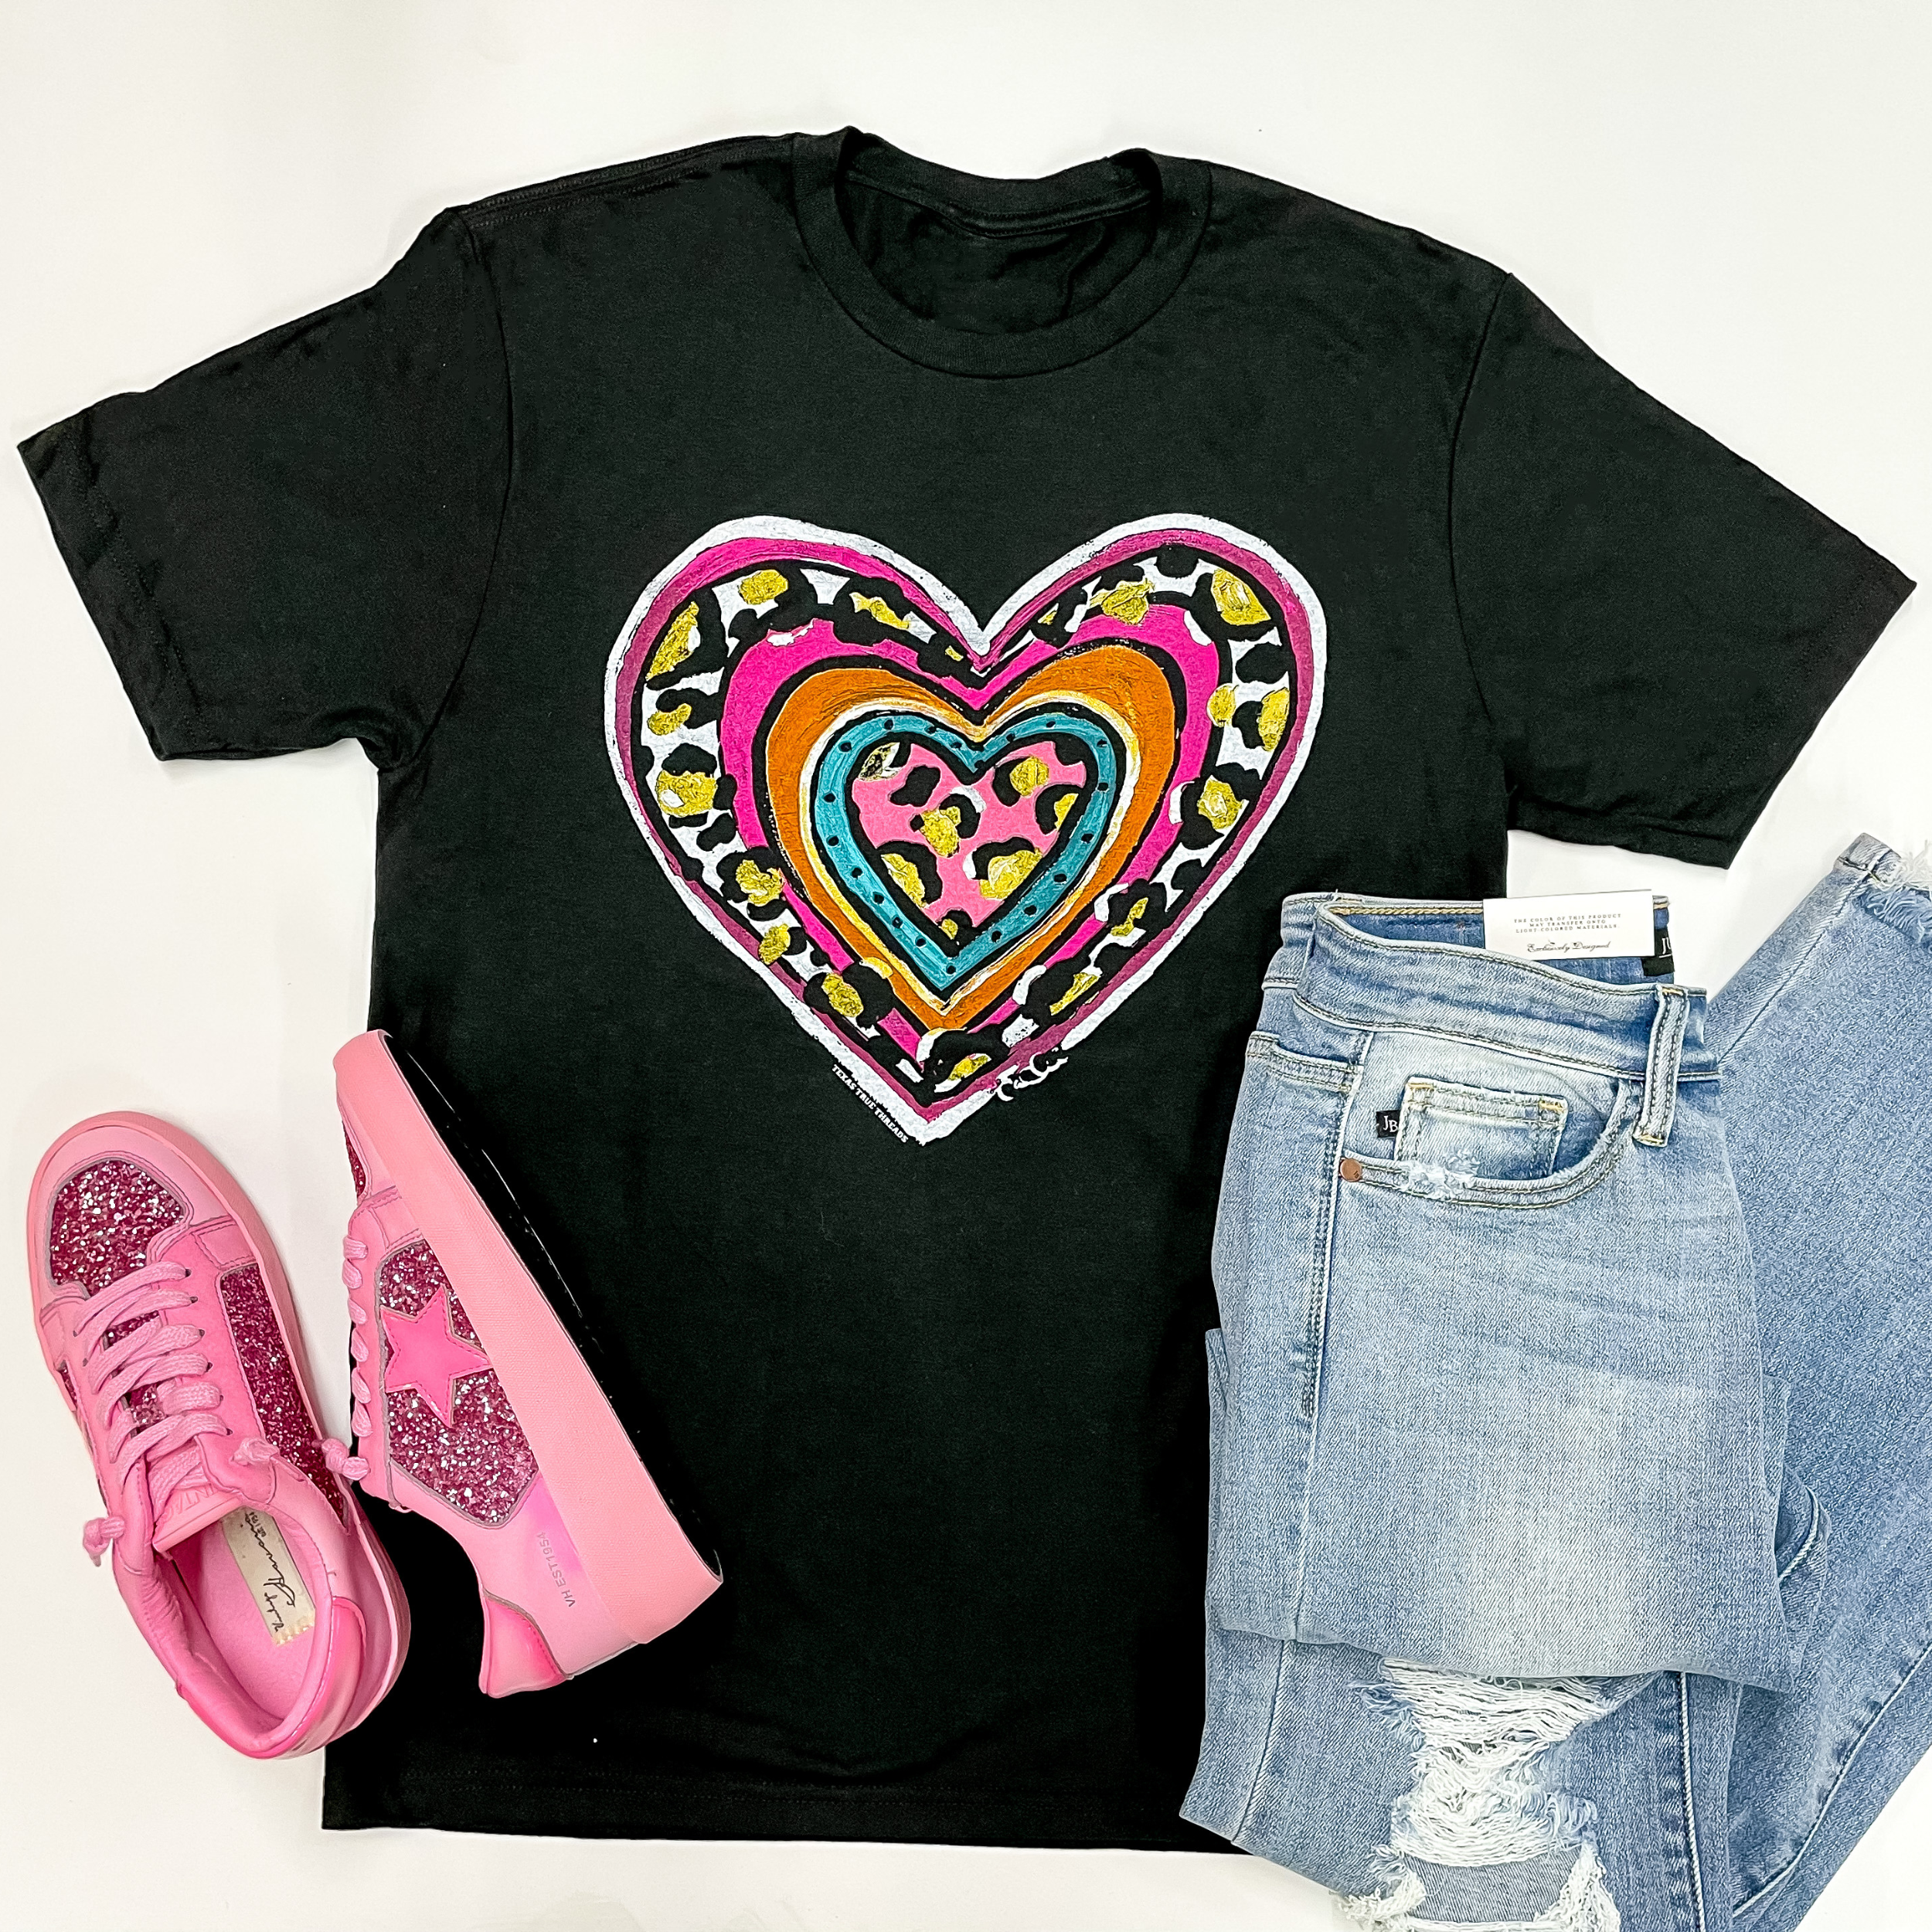 A black short sleeve tee shirt with a heart graphic that is  a mix of blue, pink, orange, gold, and leopard print. This tee shirt is pictured on a white background with distressed jeans and pink sneakers to match.